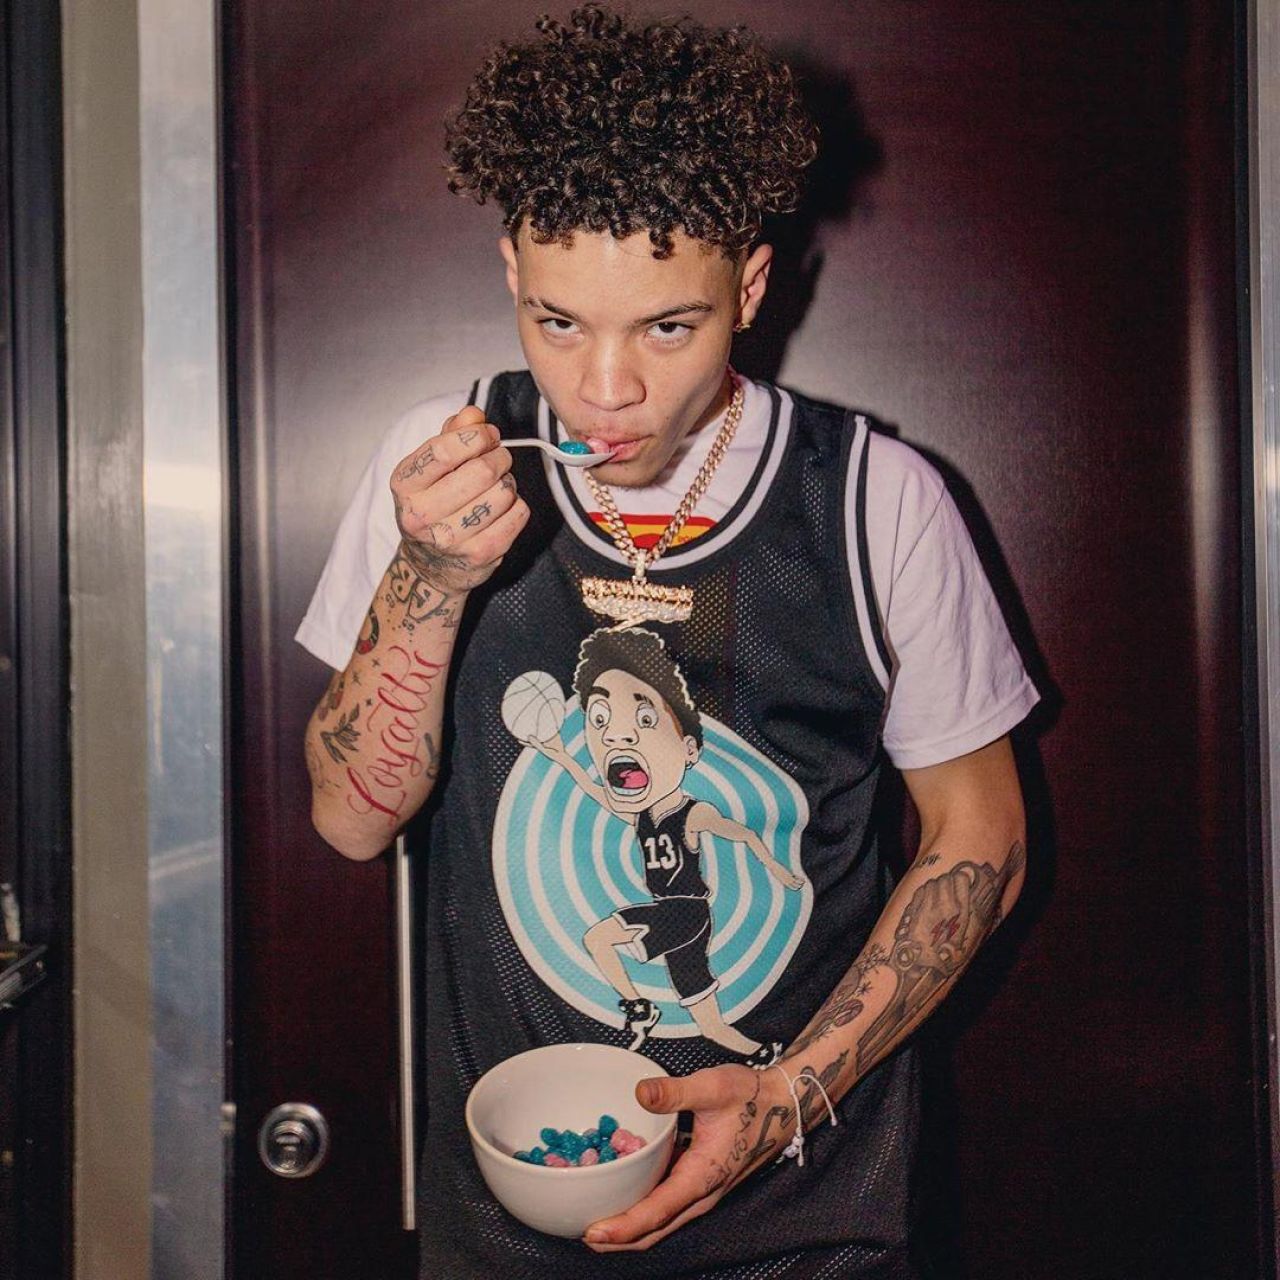 The tank top worn by Lil Mosey on his account Instagram @lilmosey.